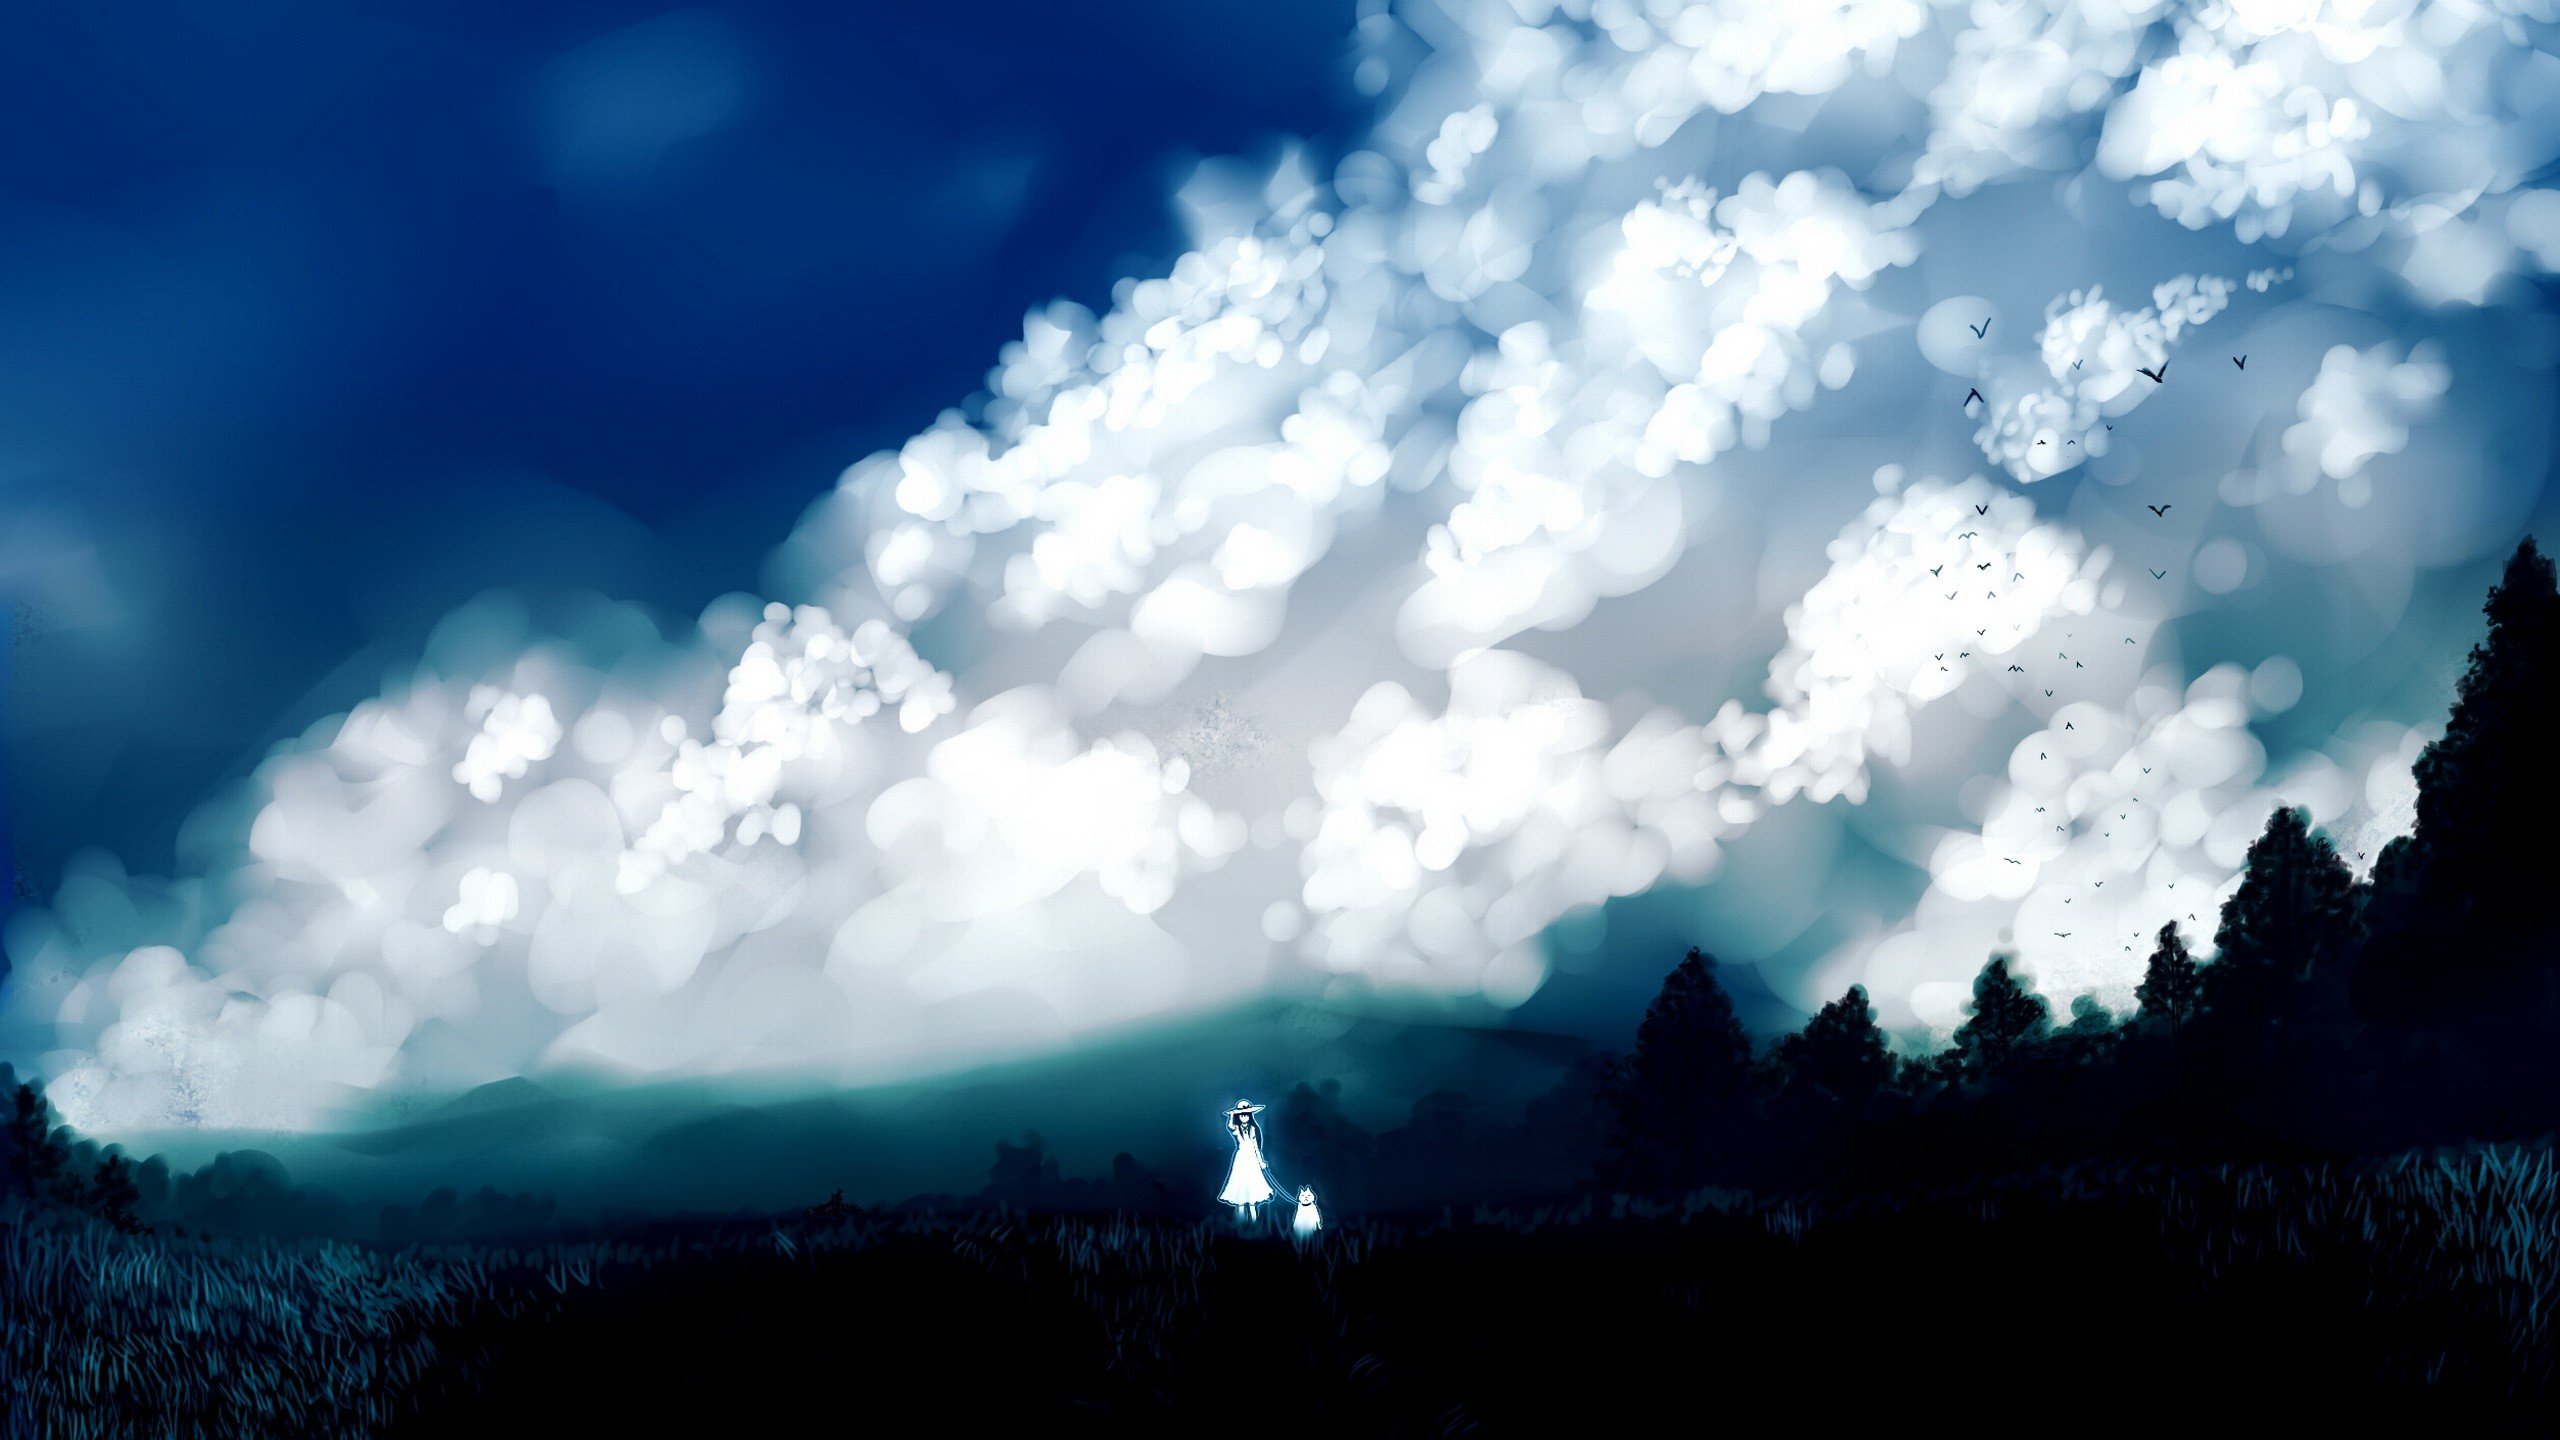 Clouds Landscapes Nature Trees Dress Forests Birds Grass Dogs Long Hair Outdoors Scenic White Dress Skyscapes Hats Anime Girls Black Hair Skies Original Characters Wallpapers Hd Desktop And Mobile Backgrounds - 1600x1200 anime green hair girl wallpaper roblox